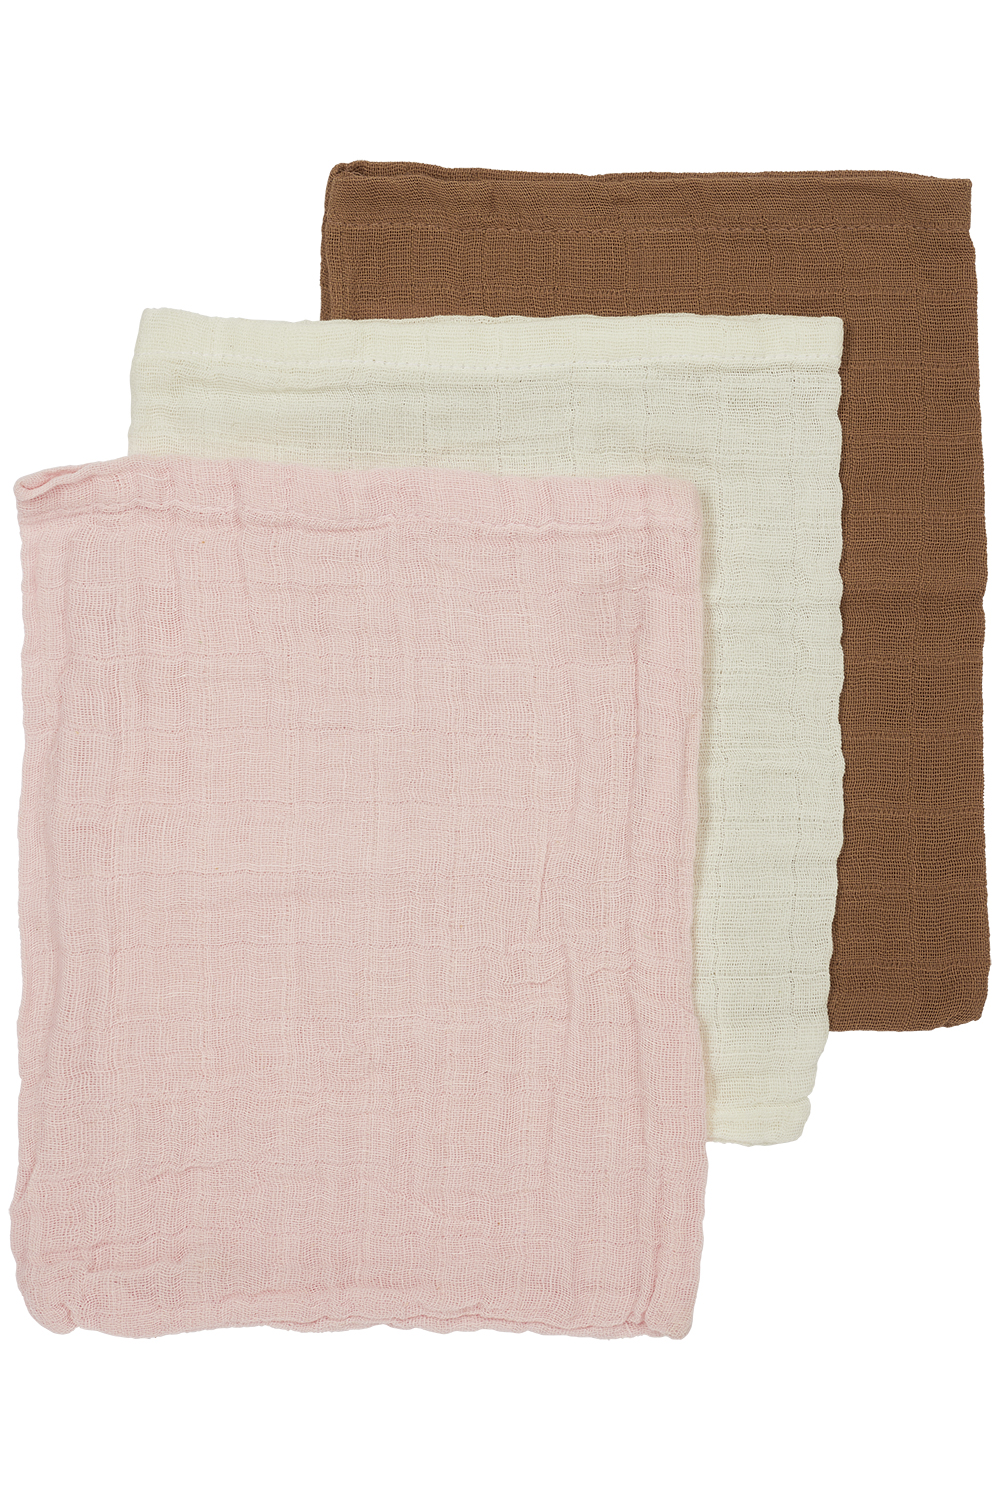 Waschhandschuhe 3er pack musselin Uni - offwhite/soft pink/toffee - 20x17cm